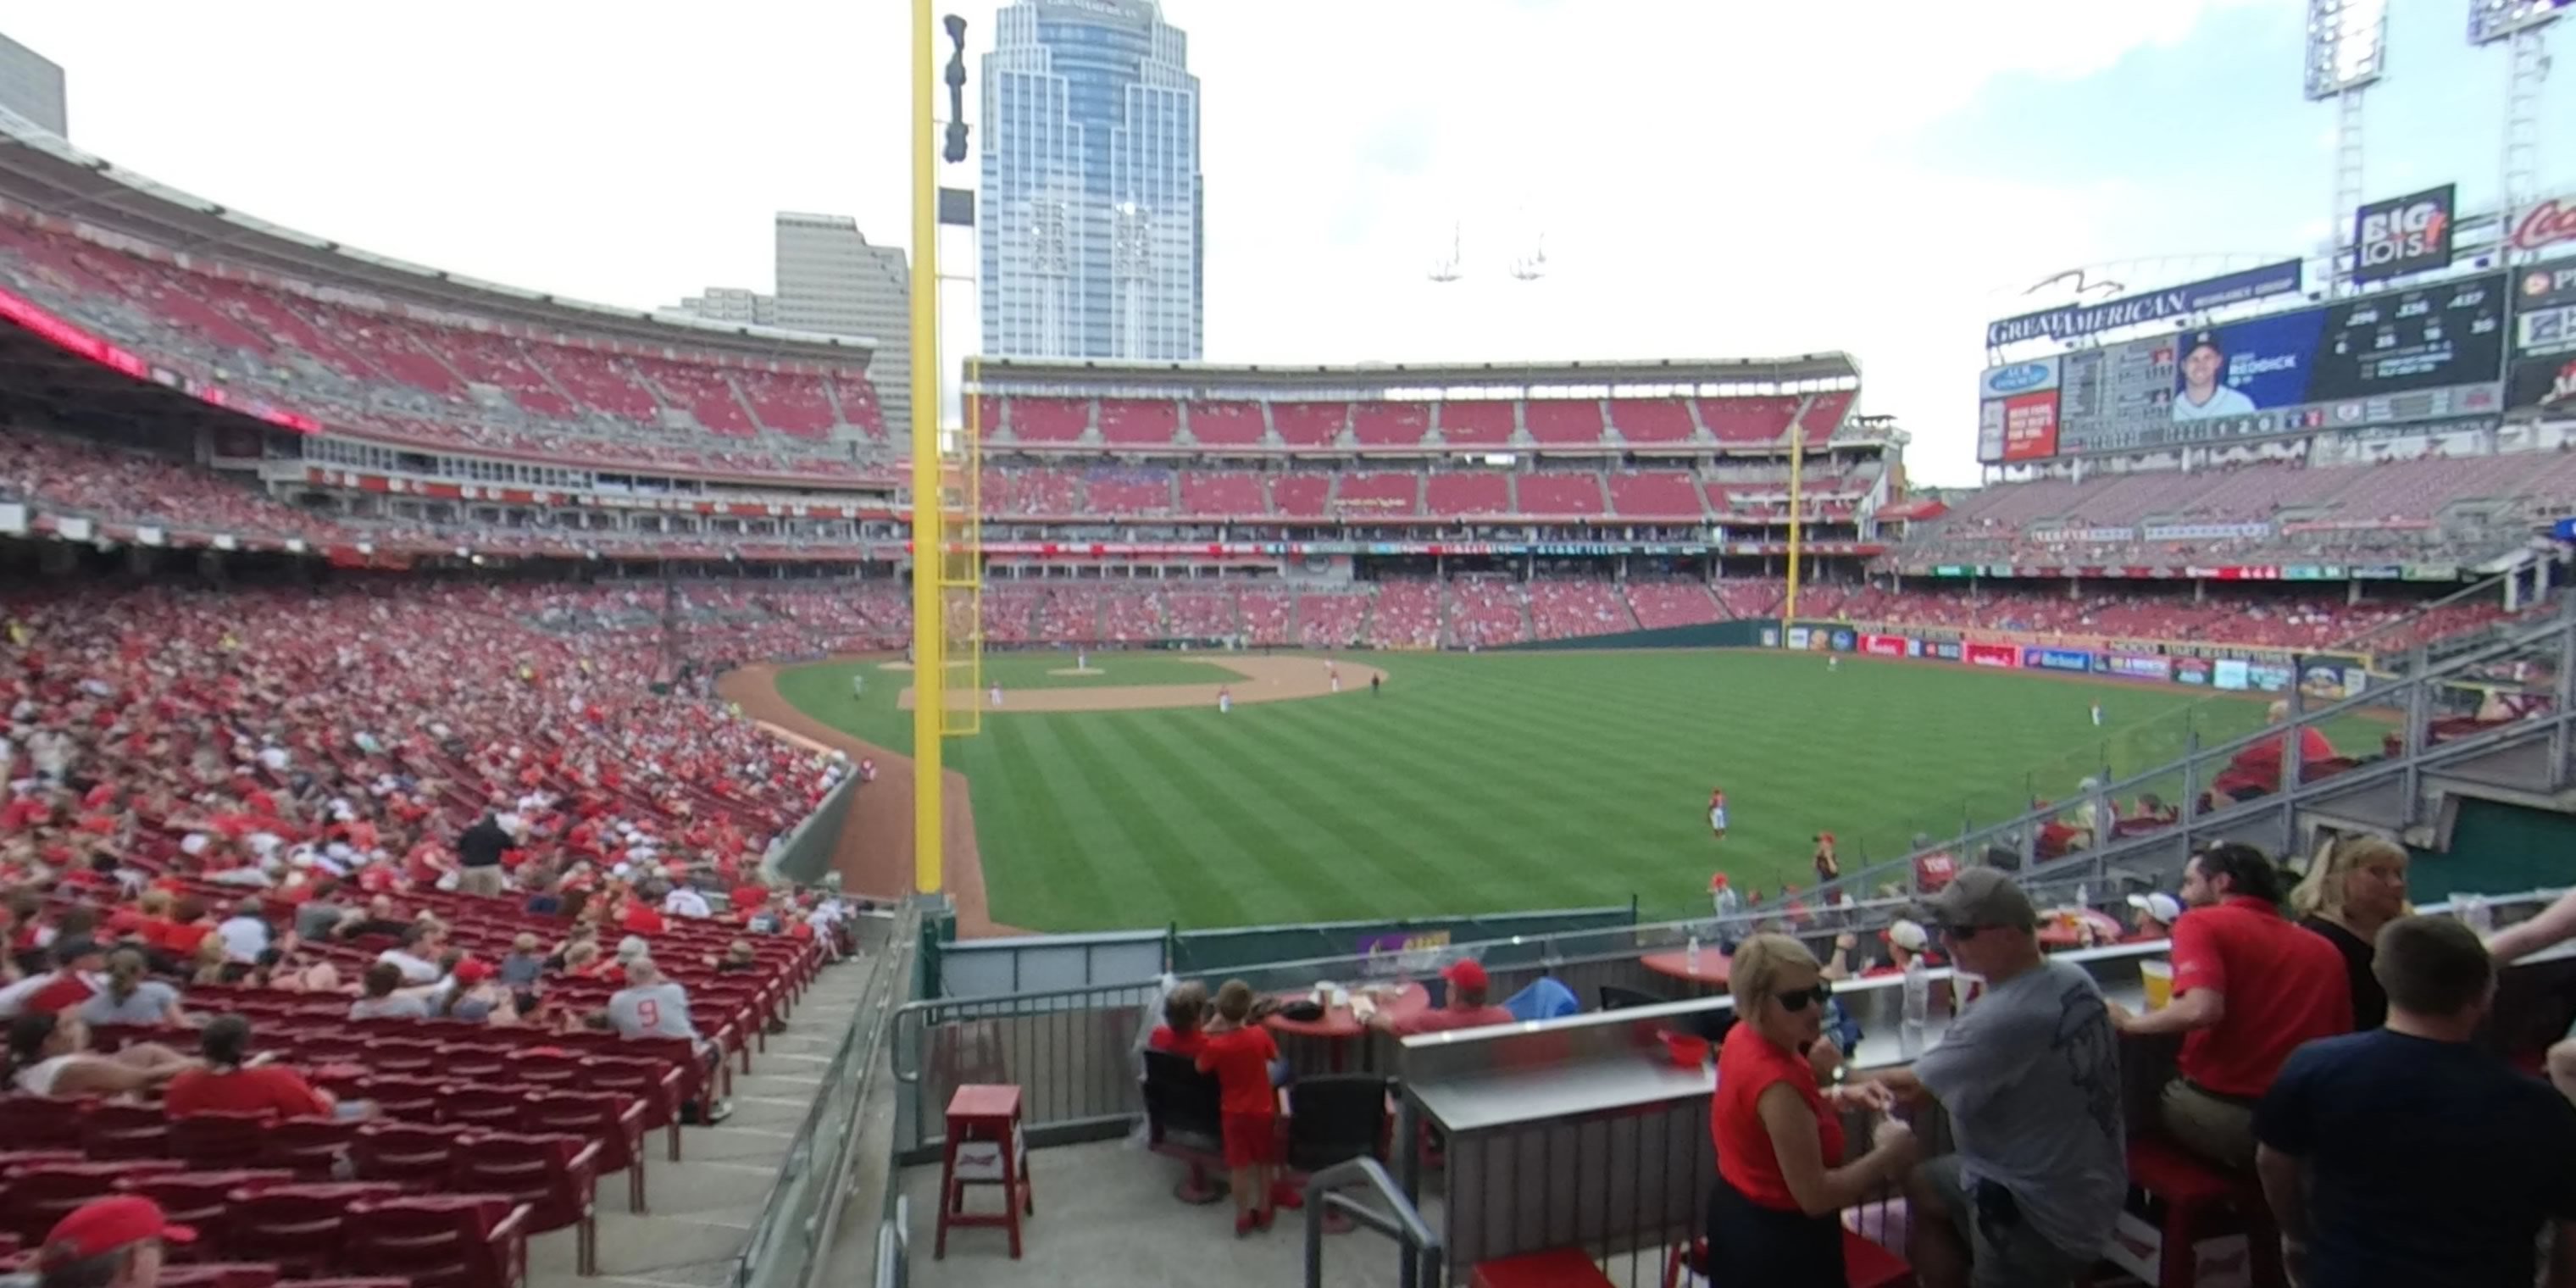 section 140 panoramic seat view  for baseball - great american ball park